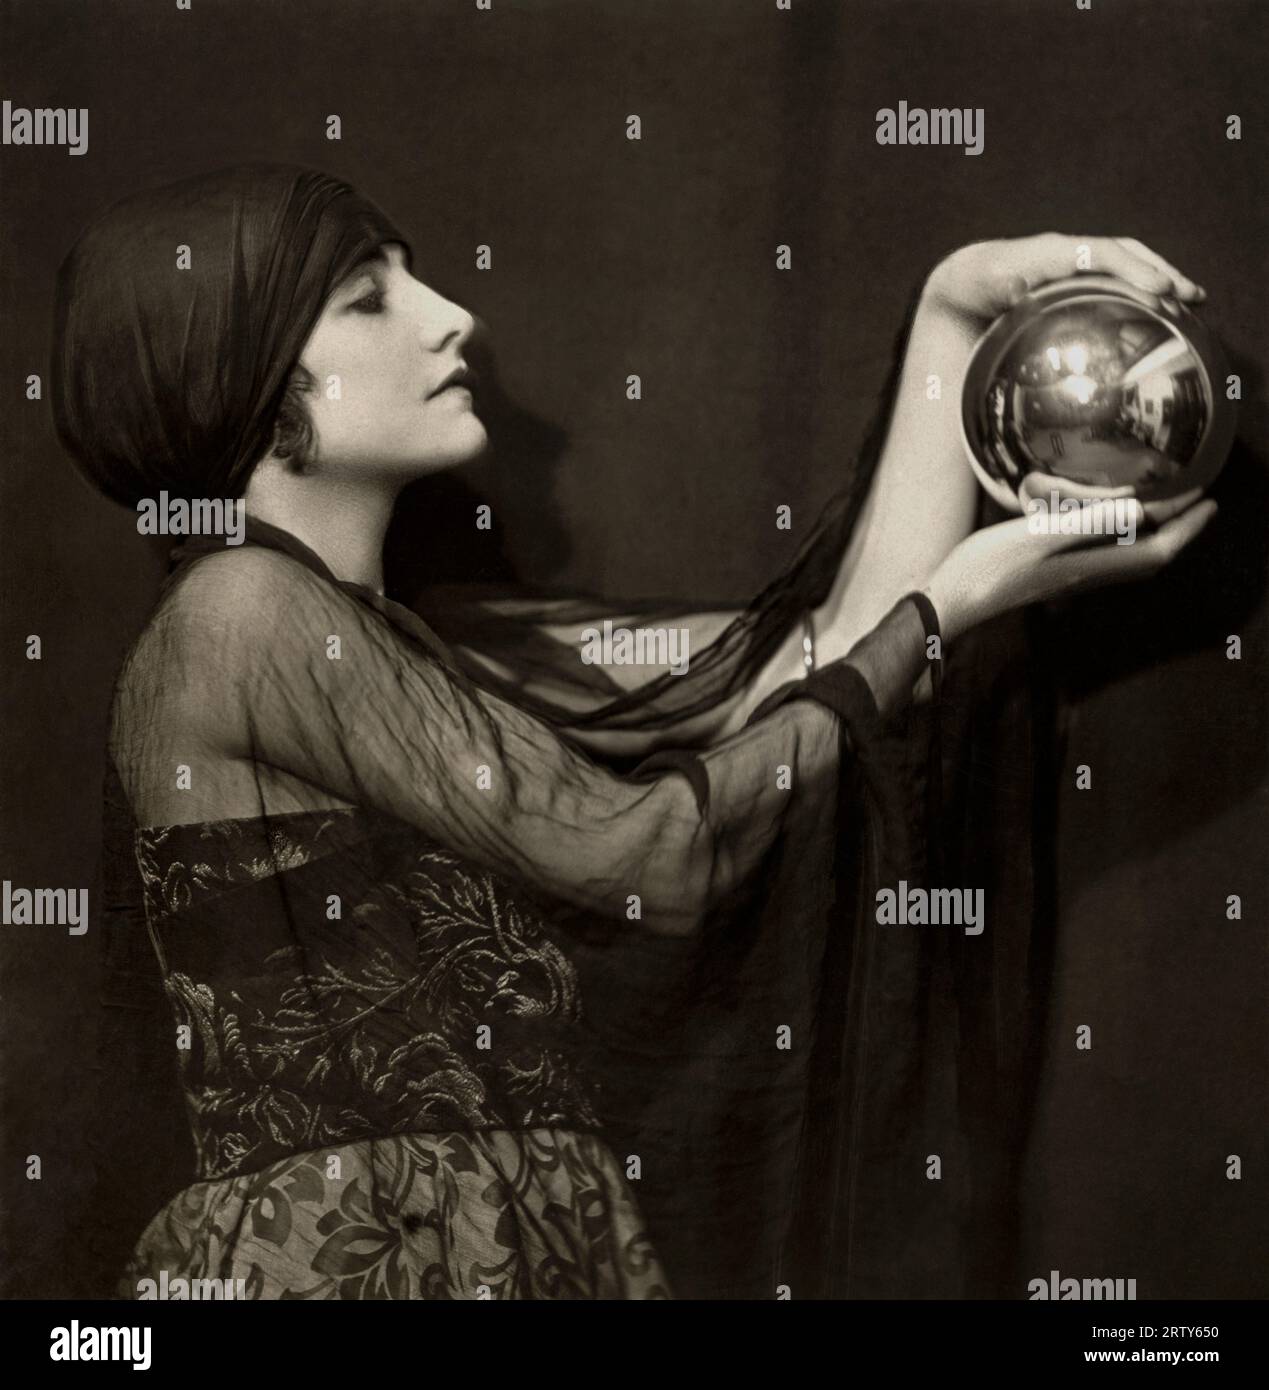 London, England   c. 1920. Silent film actress  Manora (aka Manvia)Thew gazes at the mystic in a crystal ball that she is holding in her hands.  Photograph by Emil Otto Hoppe. Stock Photo